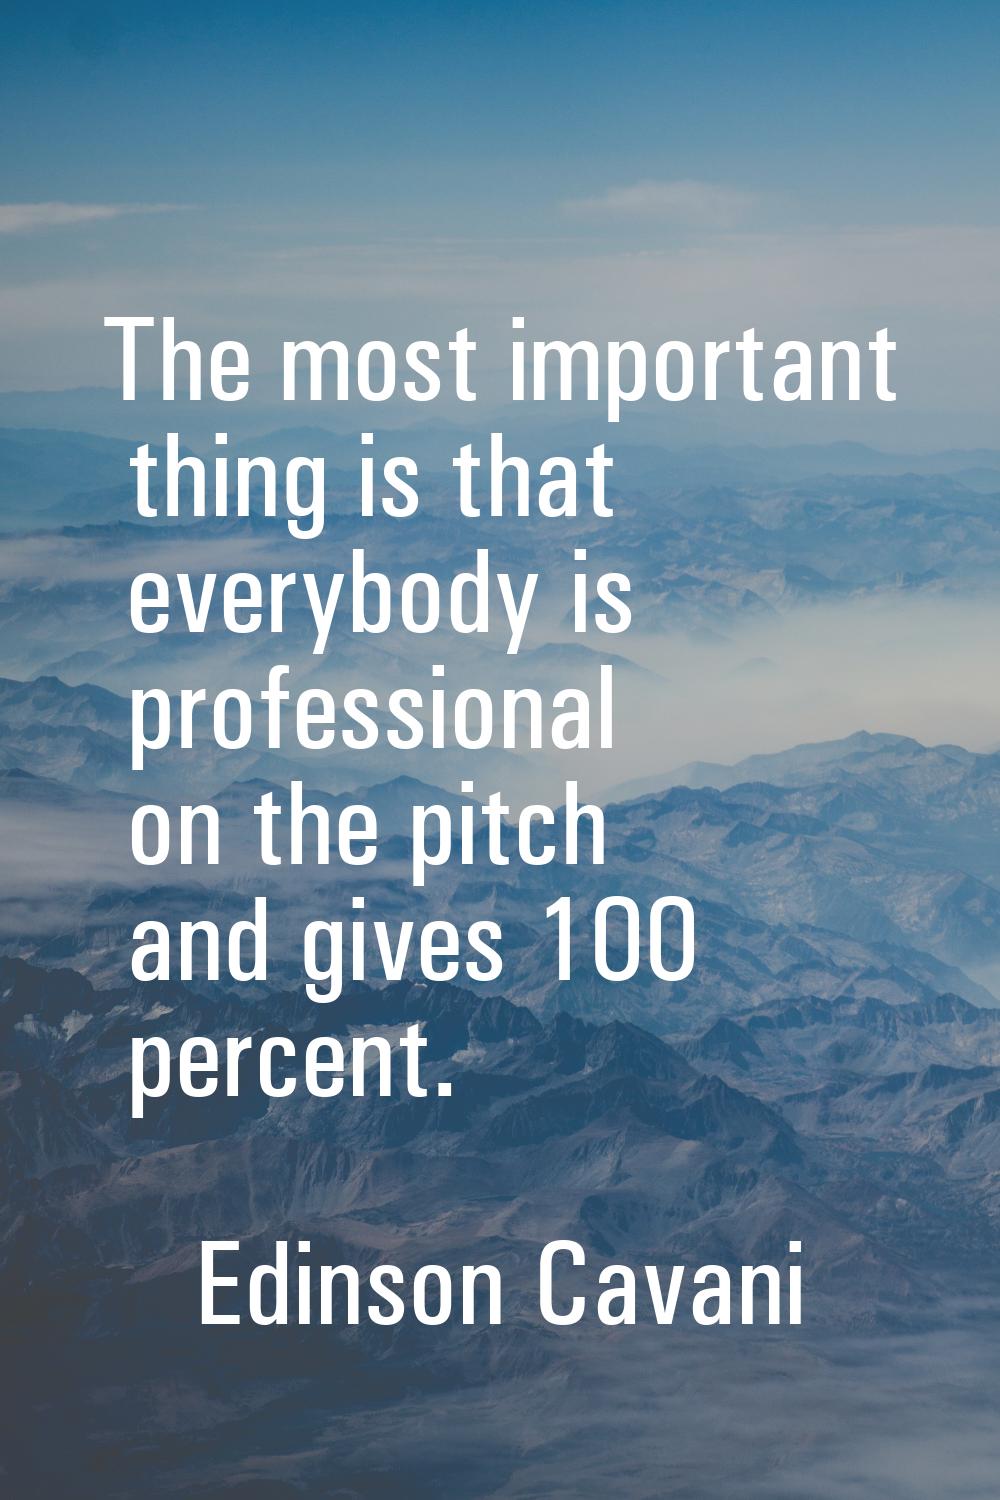 The most important thing is that everybody is professional on the pitch and gives 100 percent.